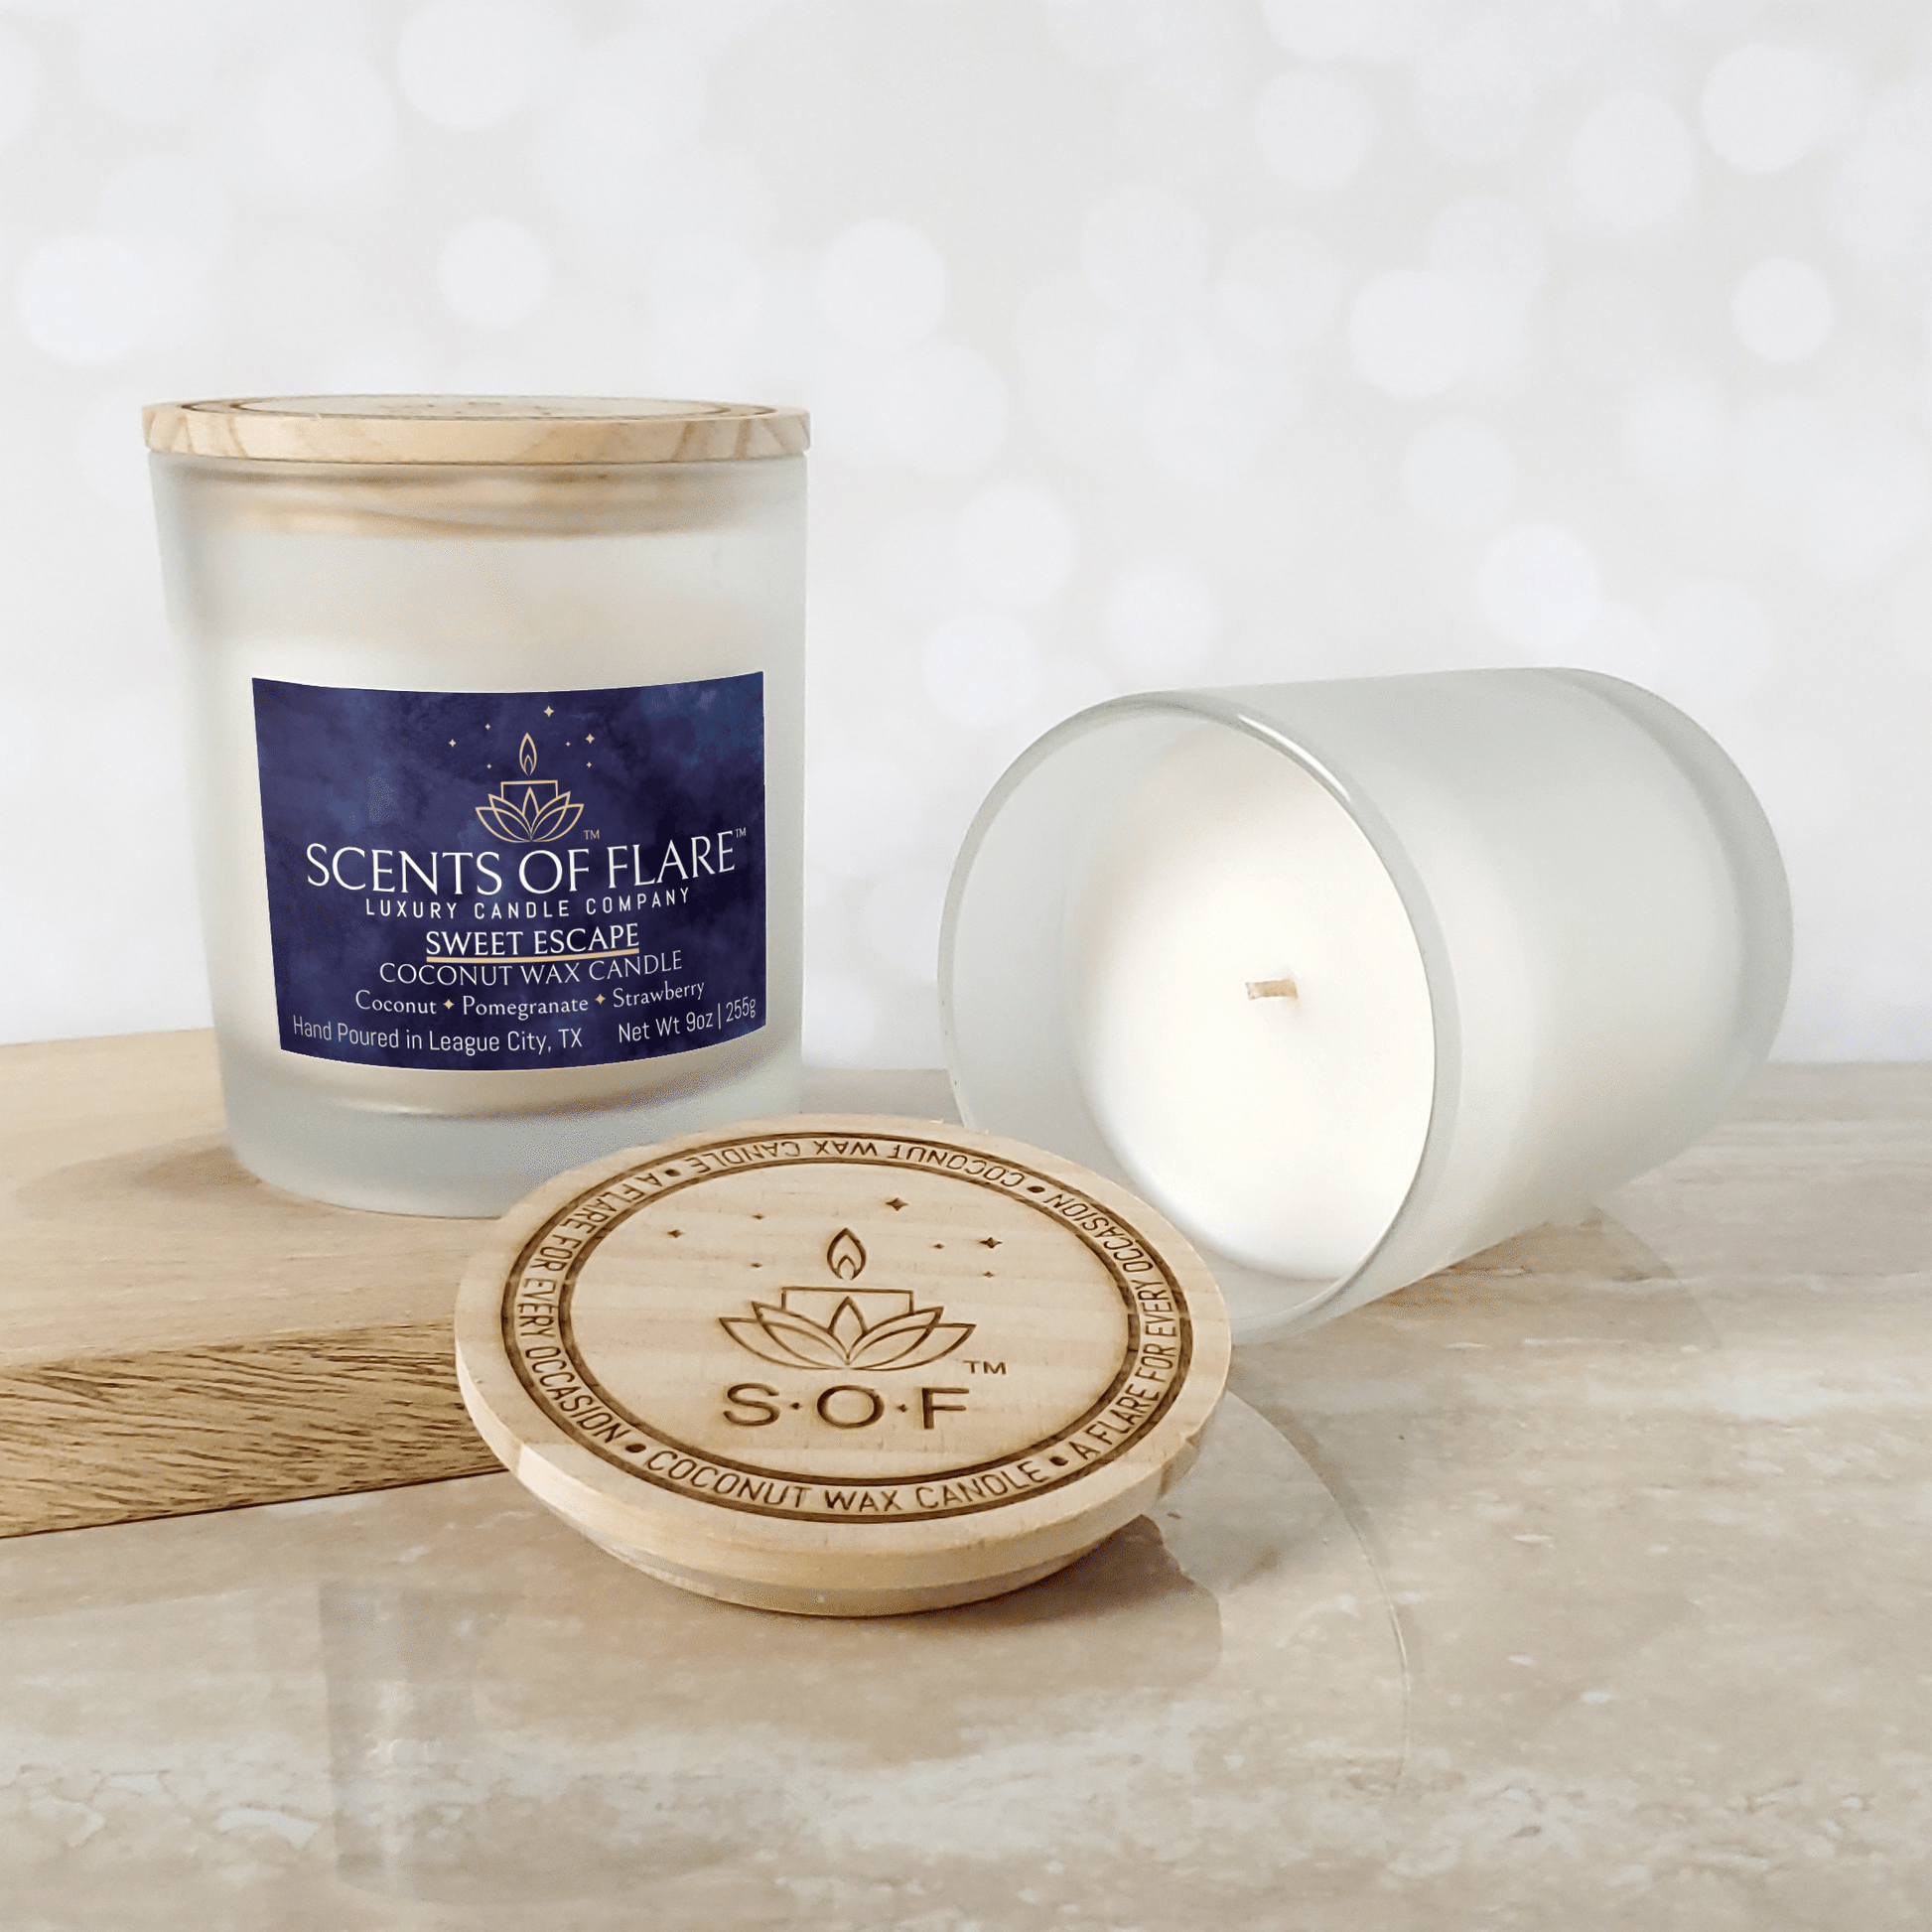 SWEET ESCAPE 9 oz CANDLE - Scents Of Flare